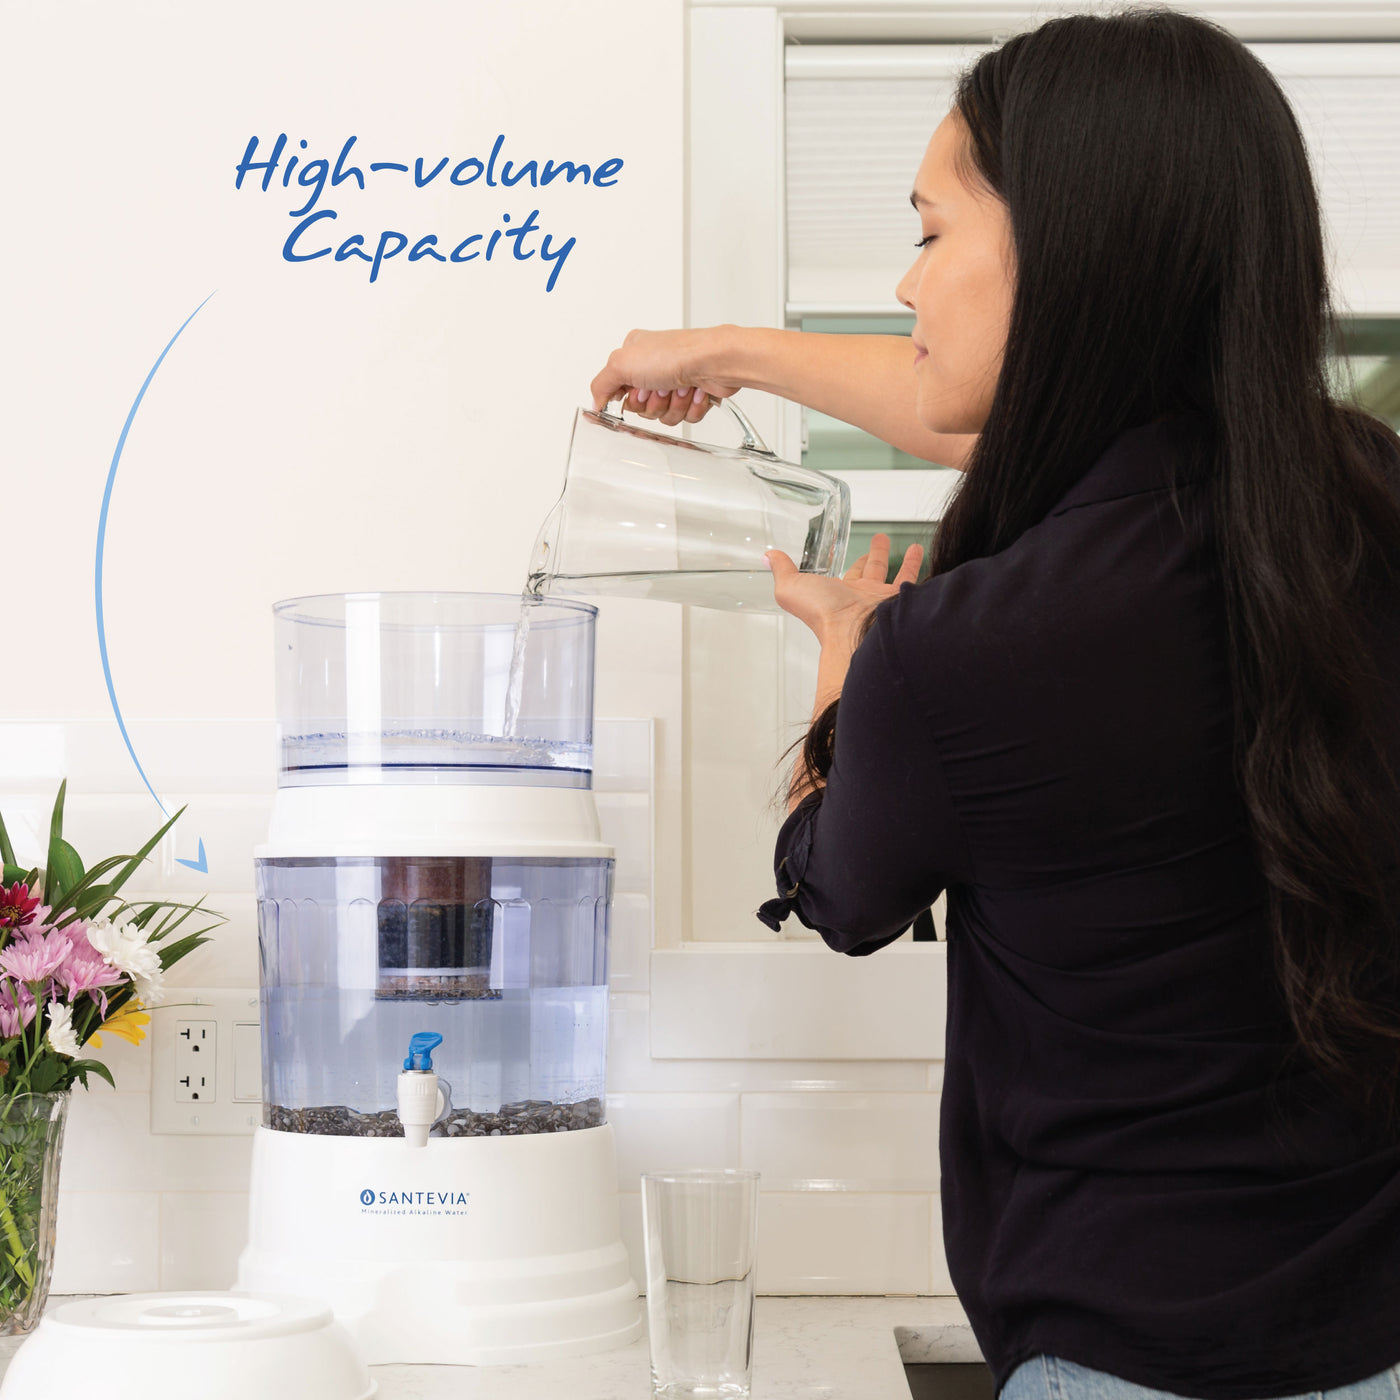 The Santevia Gravity Water System has a High Volume Capacity#model_countertop